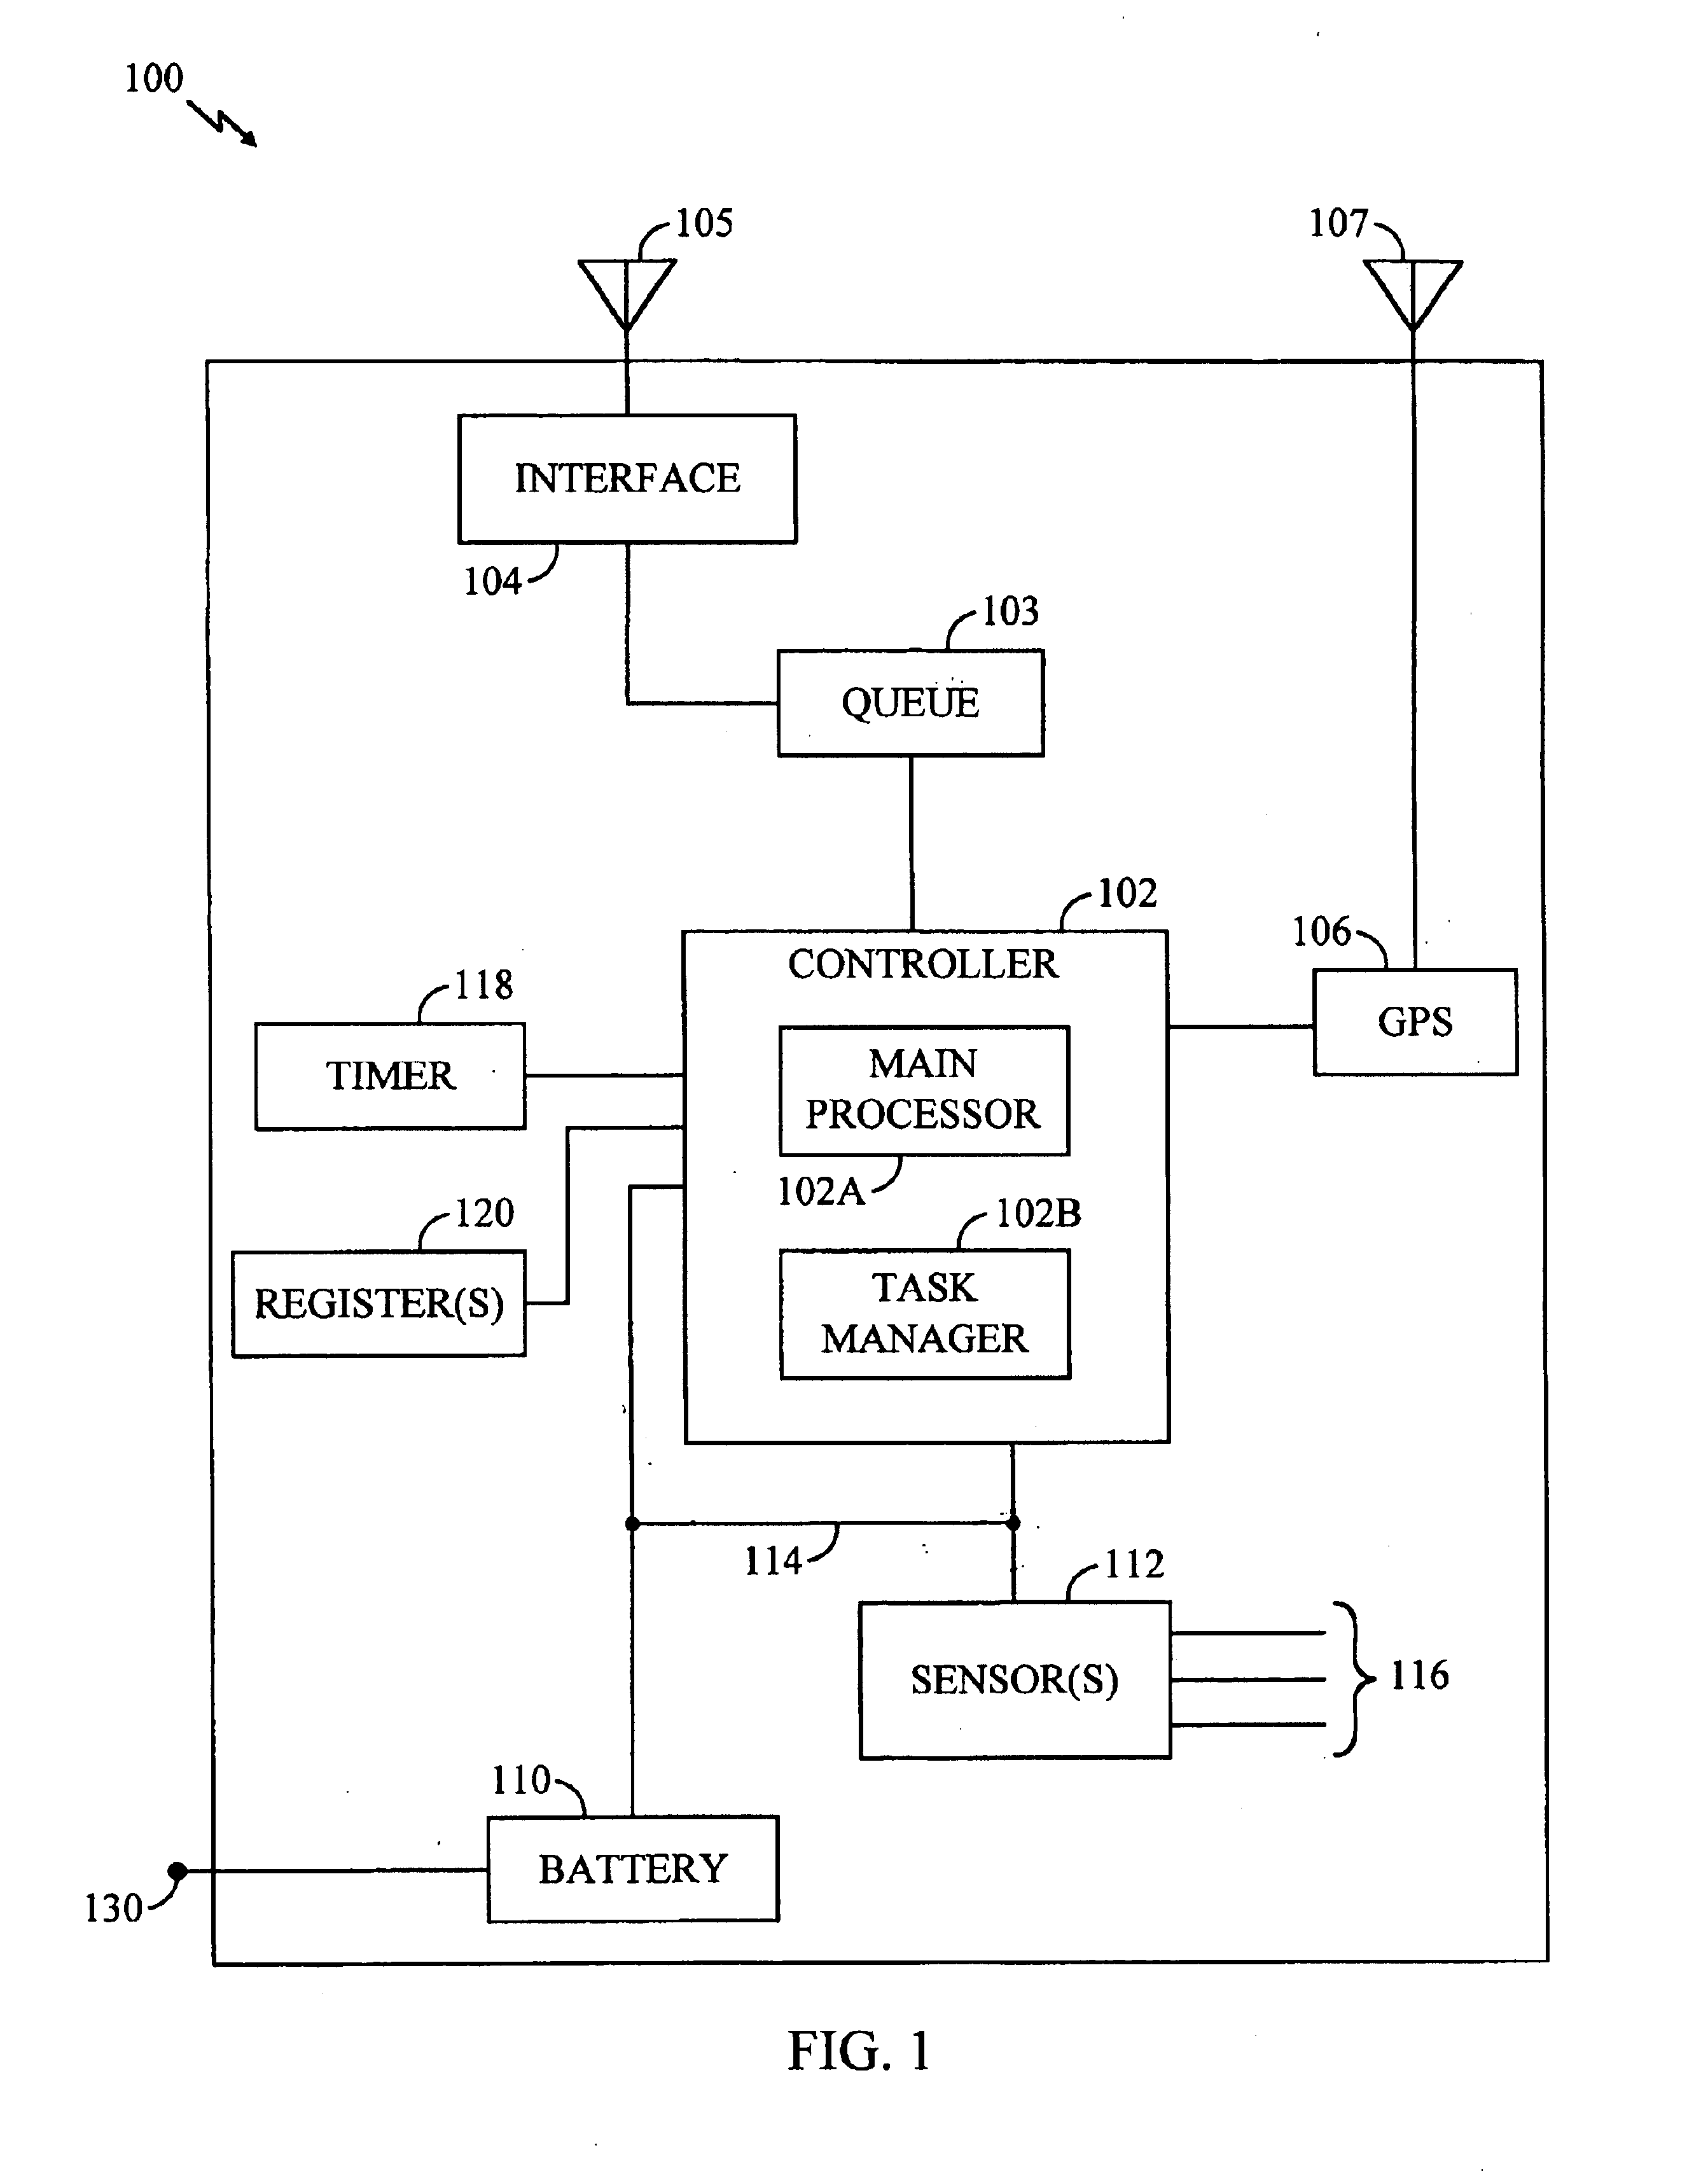 Battery monitoring system with low power and end-of-life messaging and shutdown